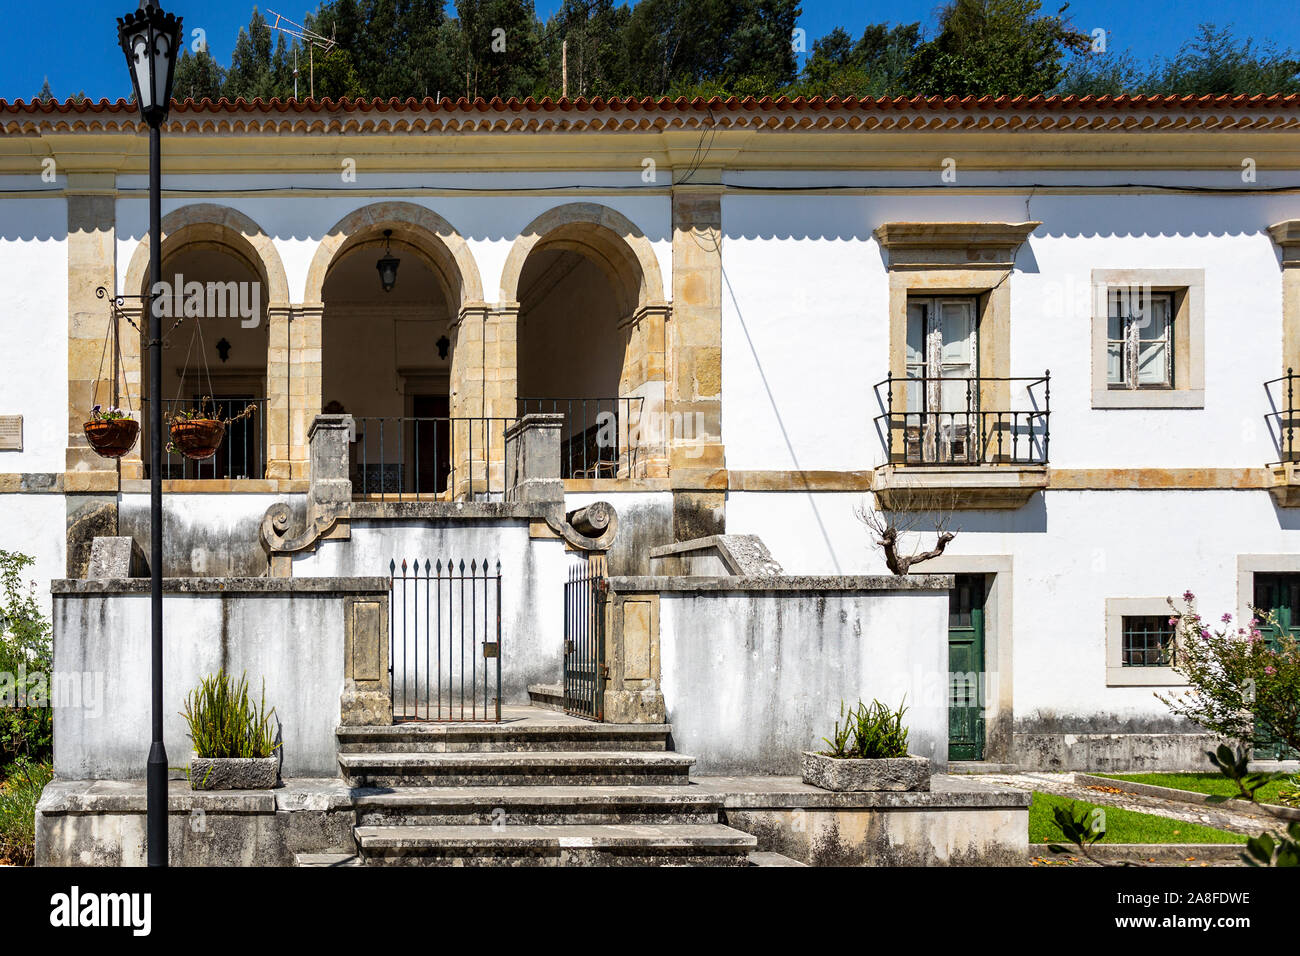 Facade of the former Priests House located in the front garden of the Monastery of Saint Mary of Lorvao, Coimbra, Portugal Stock Photo